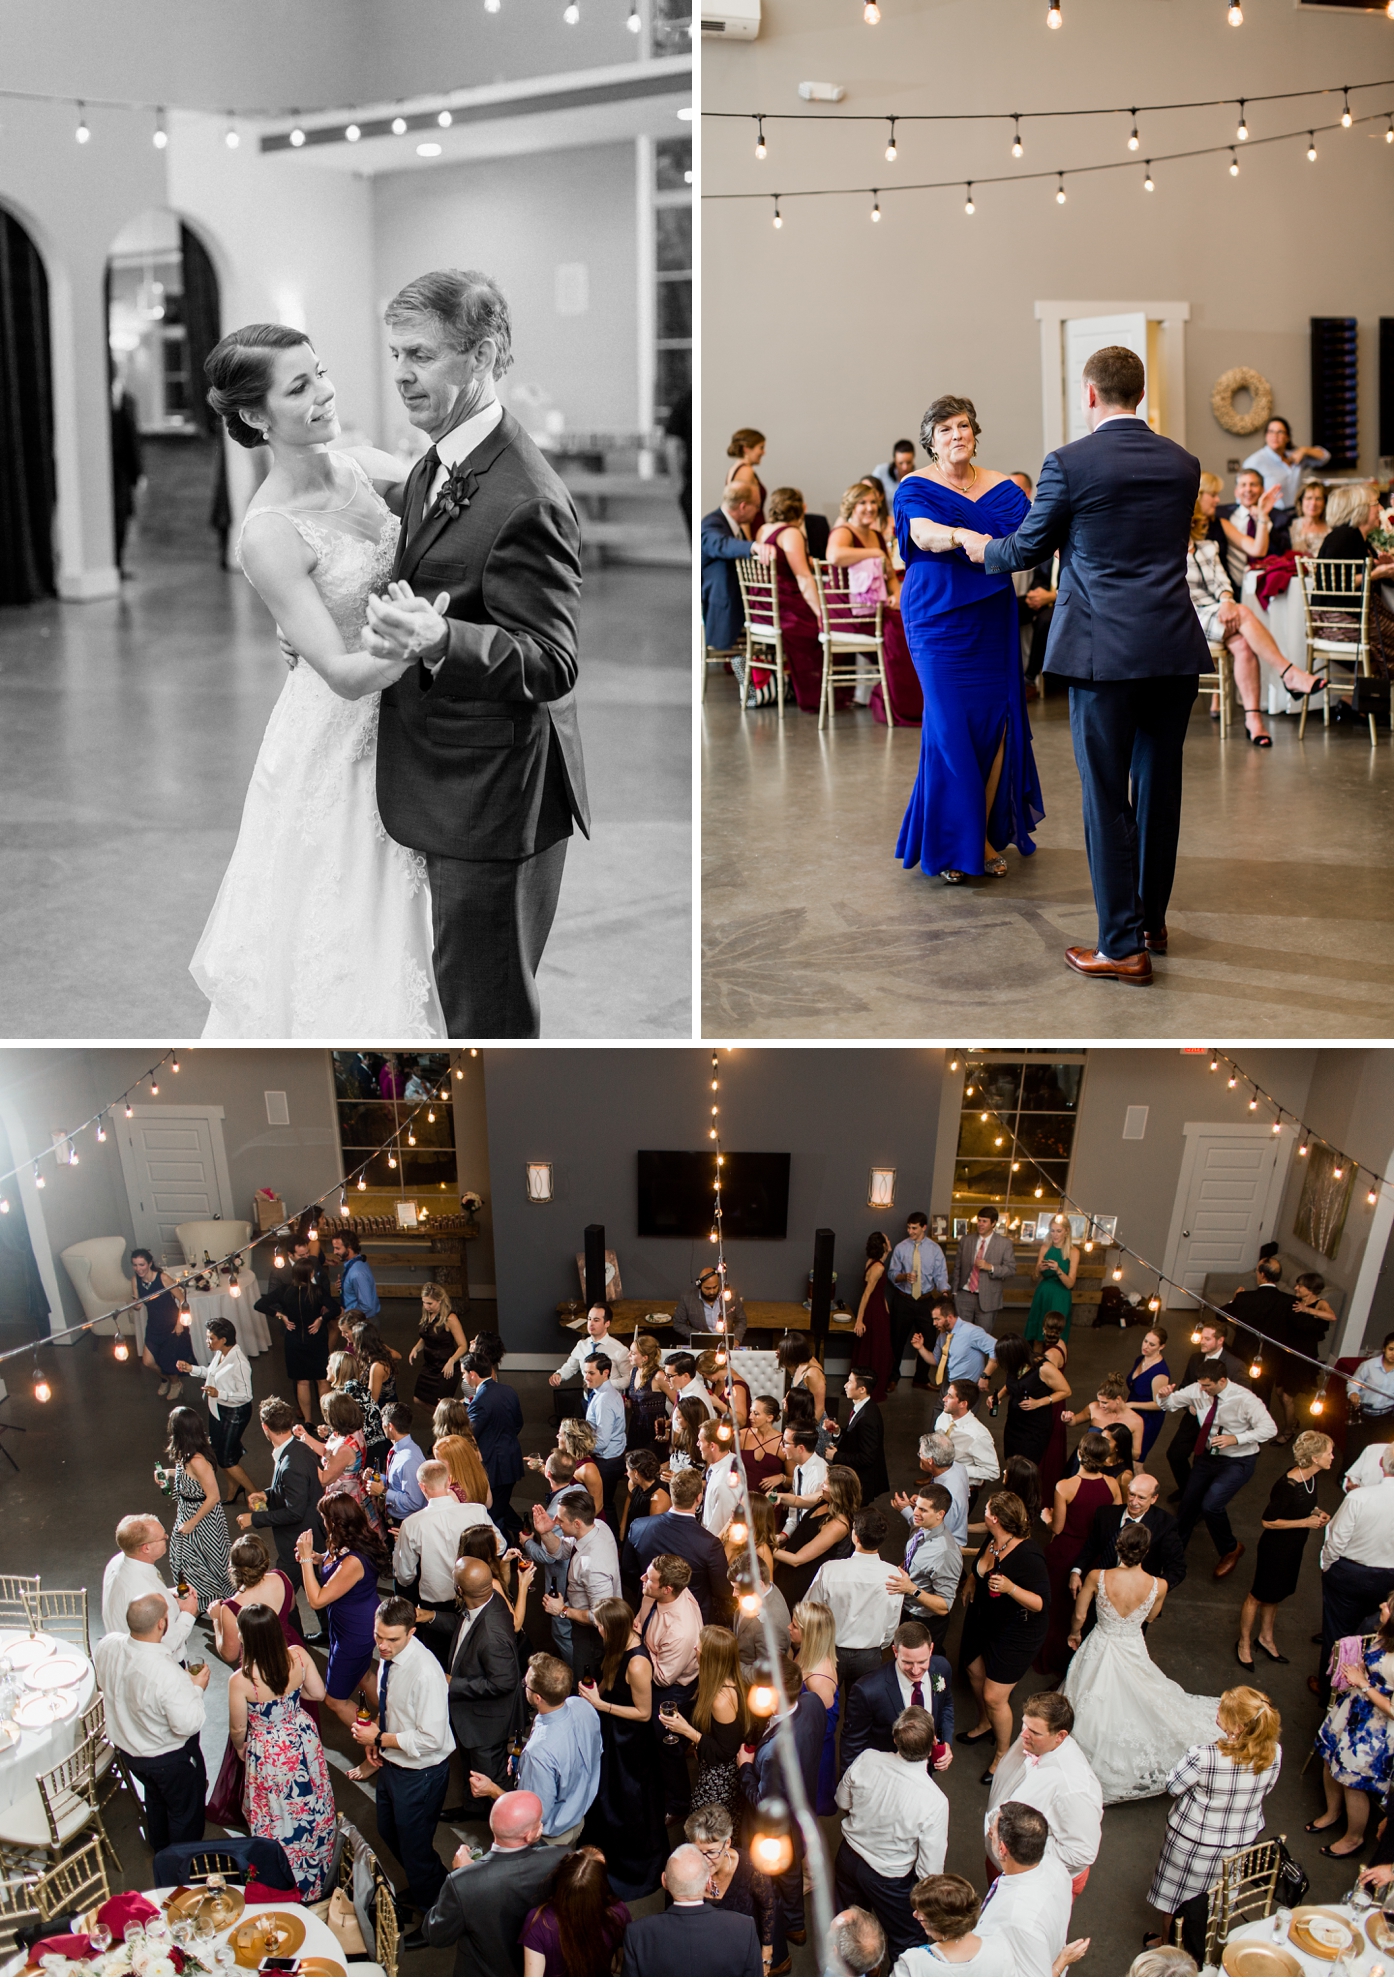 Wedding at Blue Valley Vineyard and Winery by Alisandra Photography